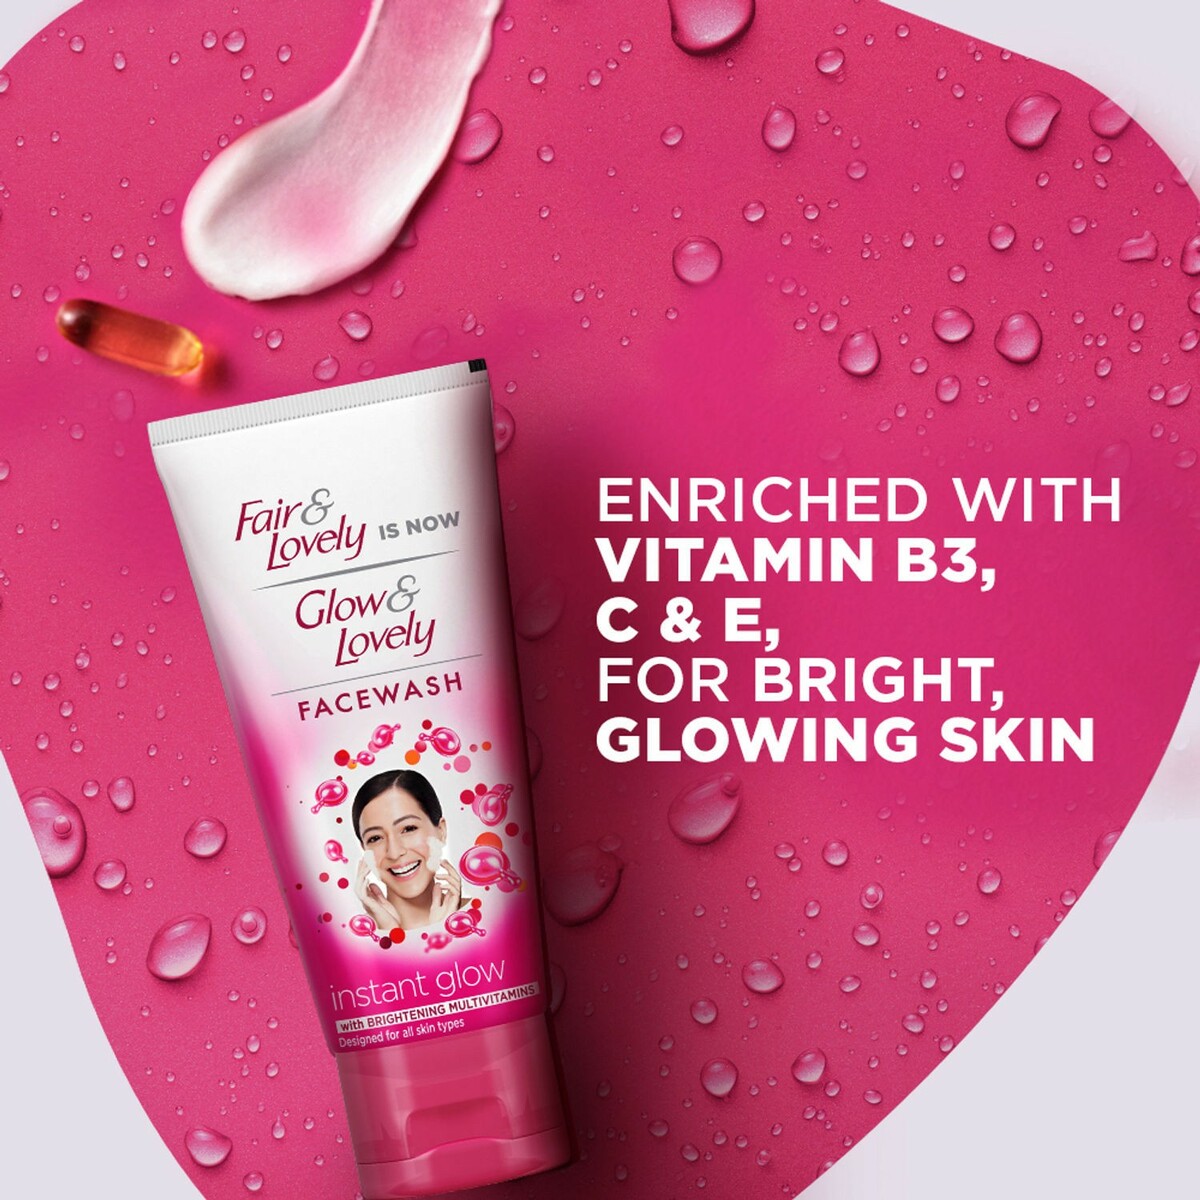 Glow &Lovely Face Wash Instant Glow 50g